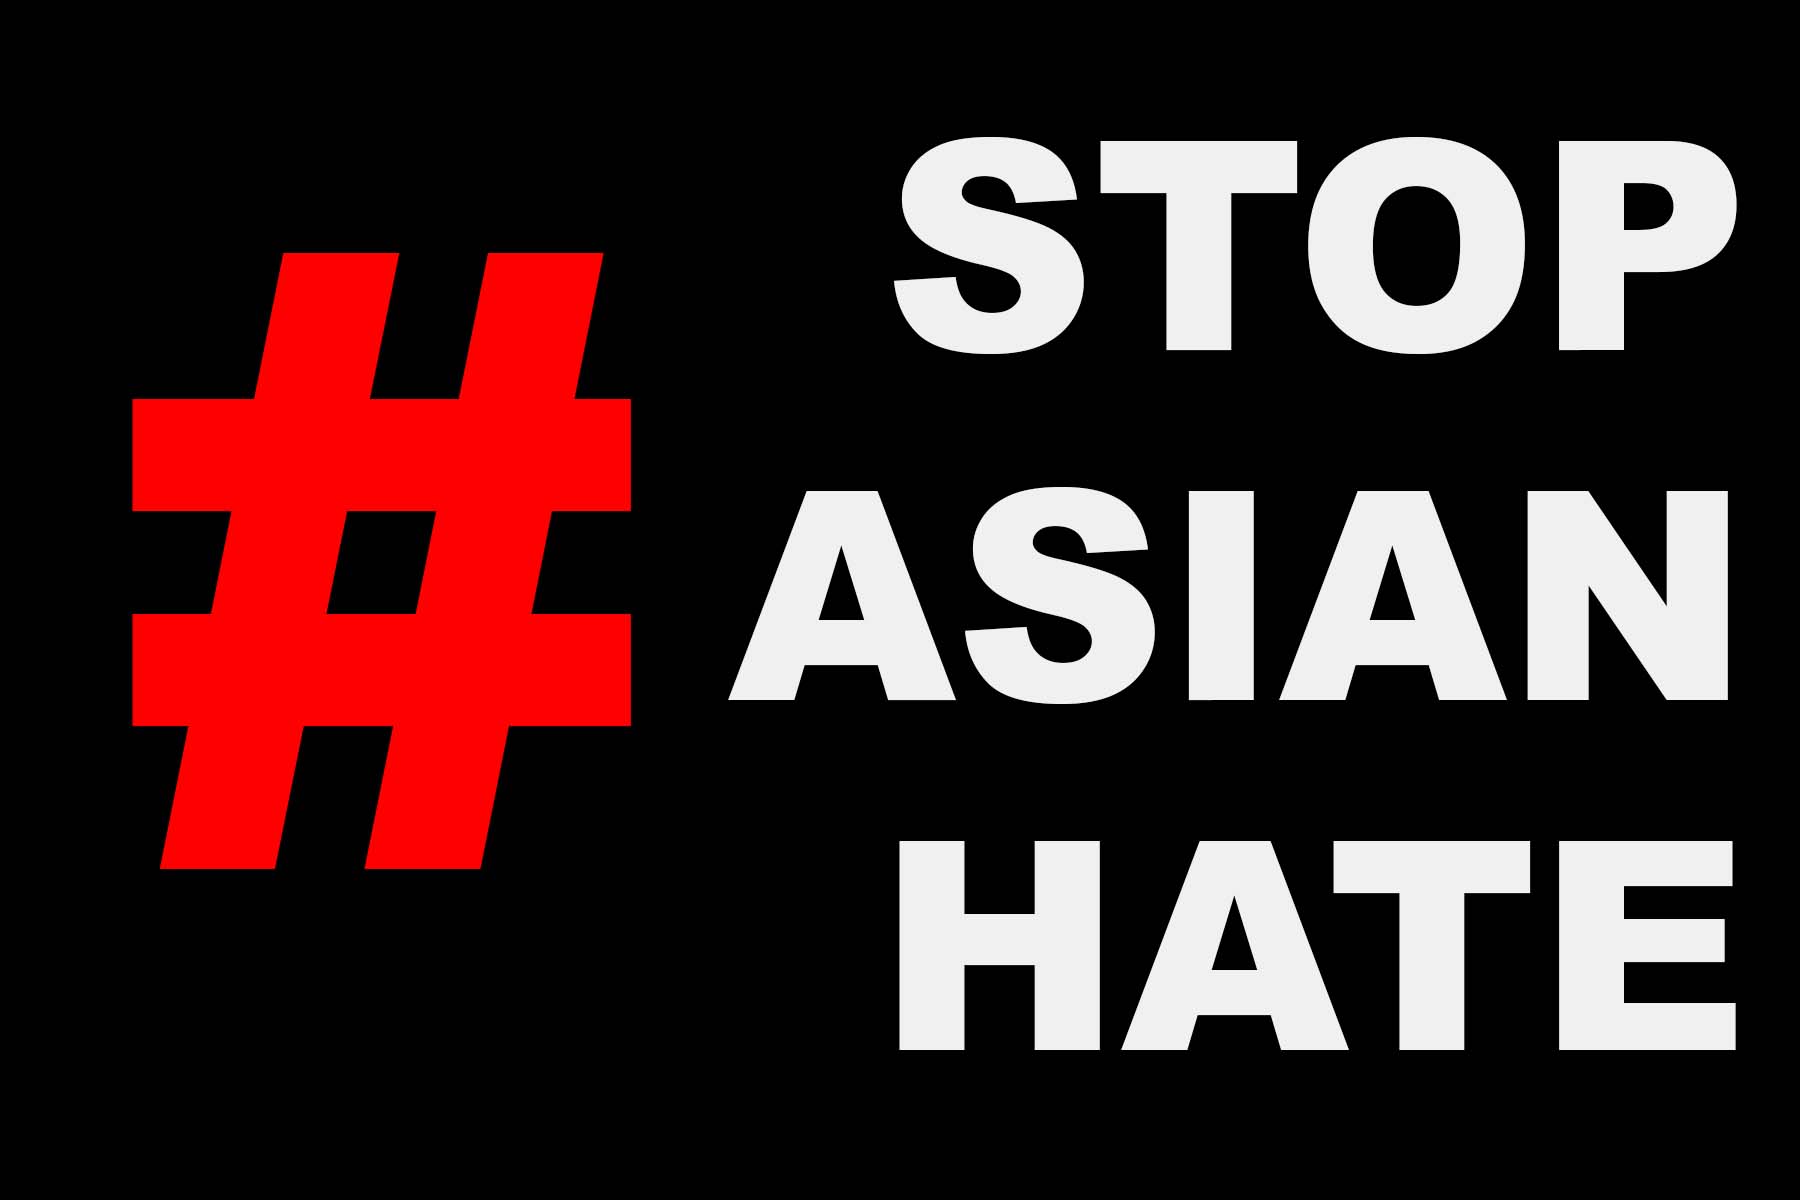 Violence against the Asian community is unacceptable